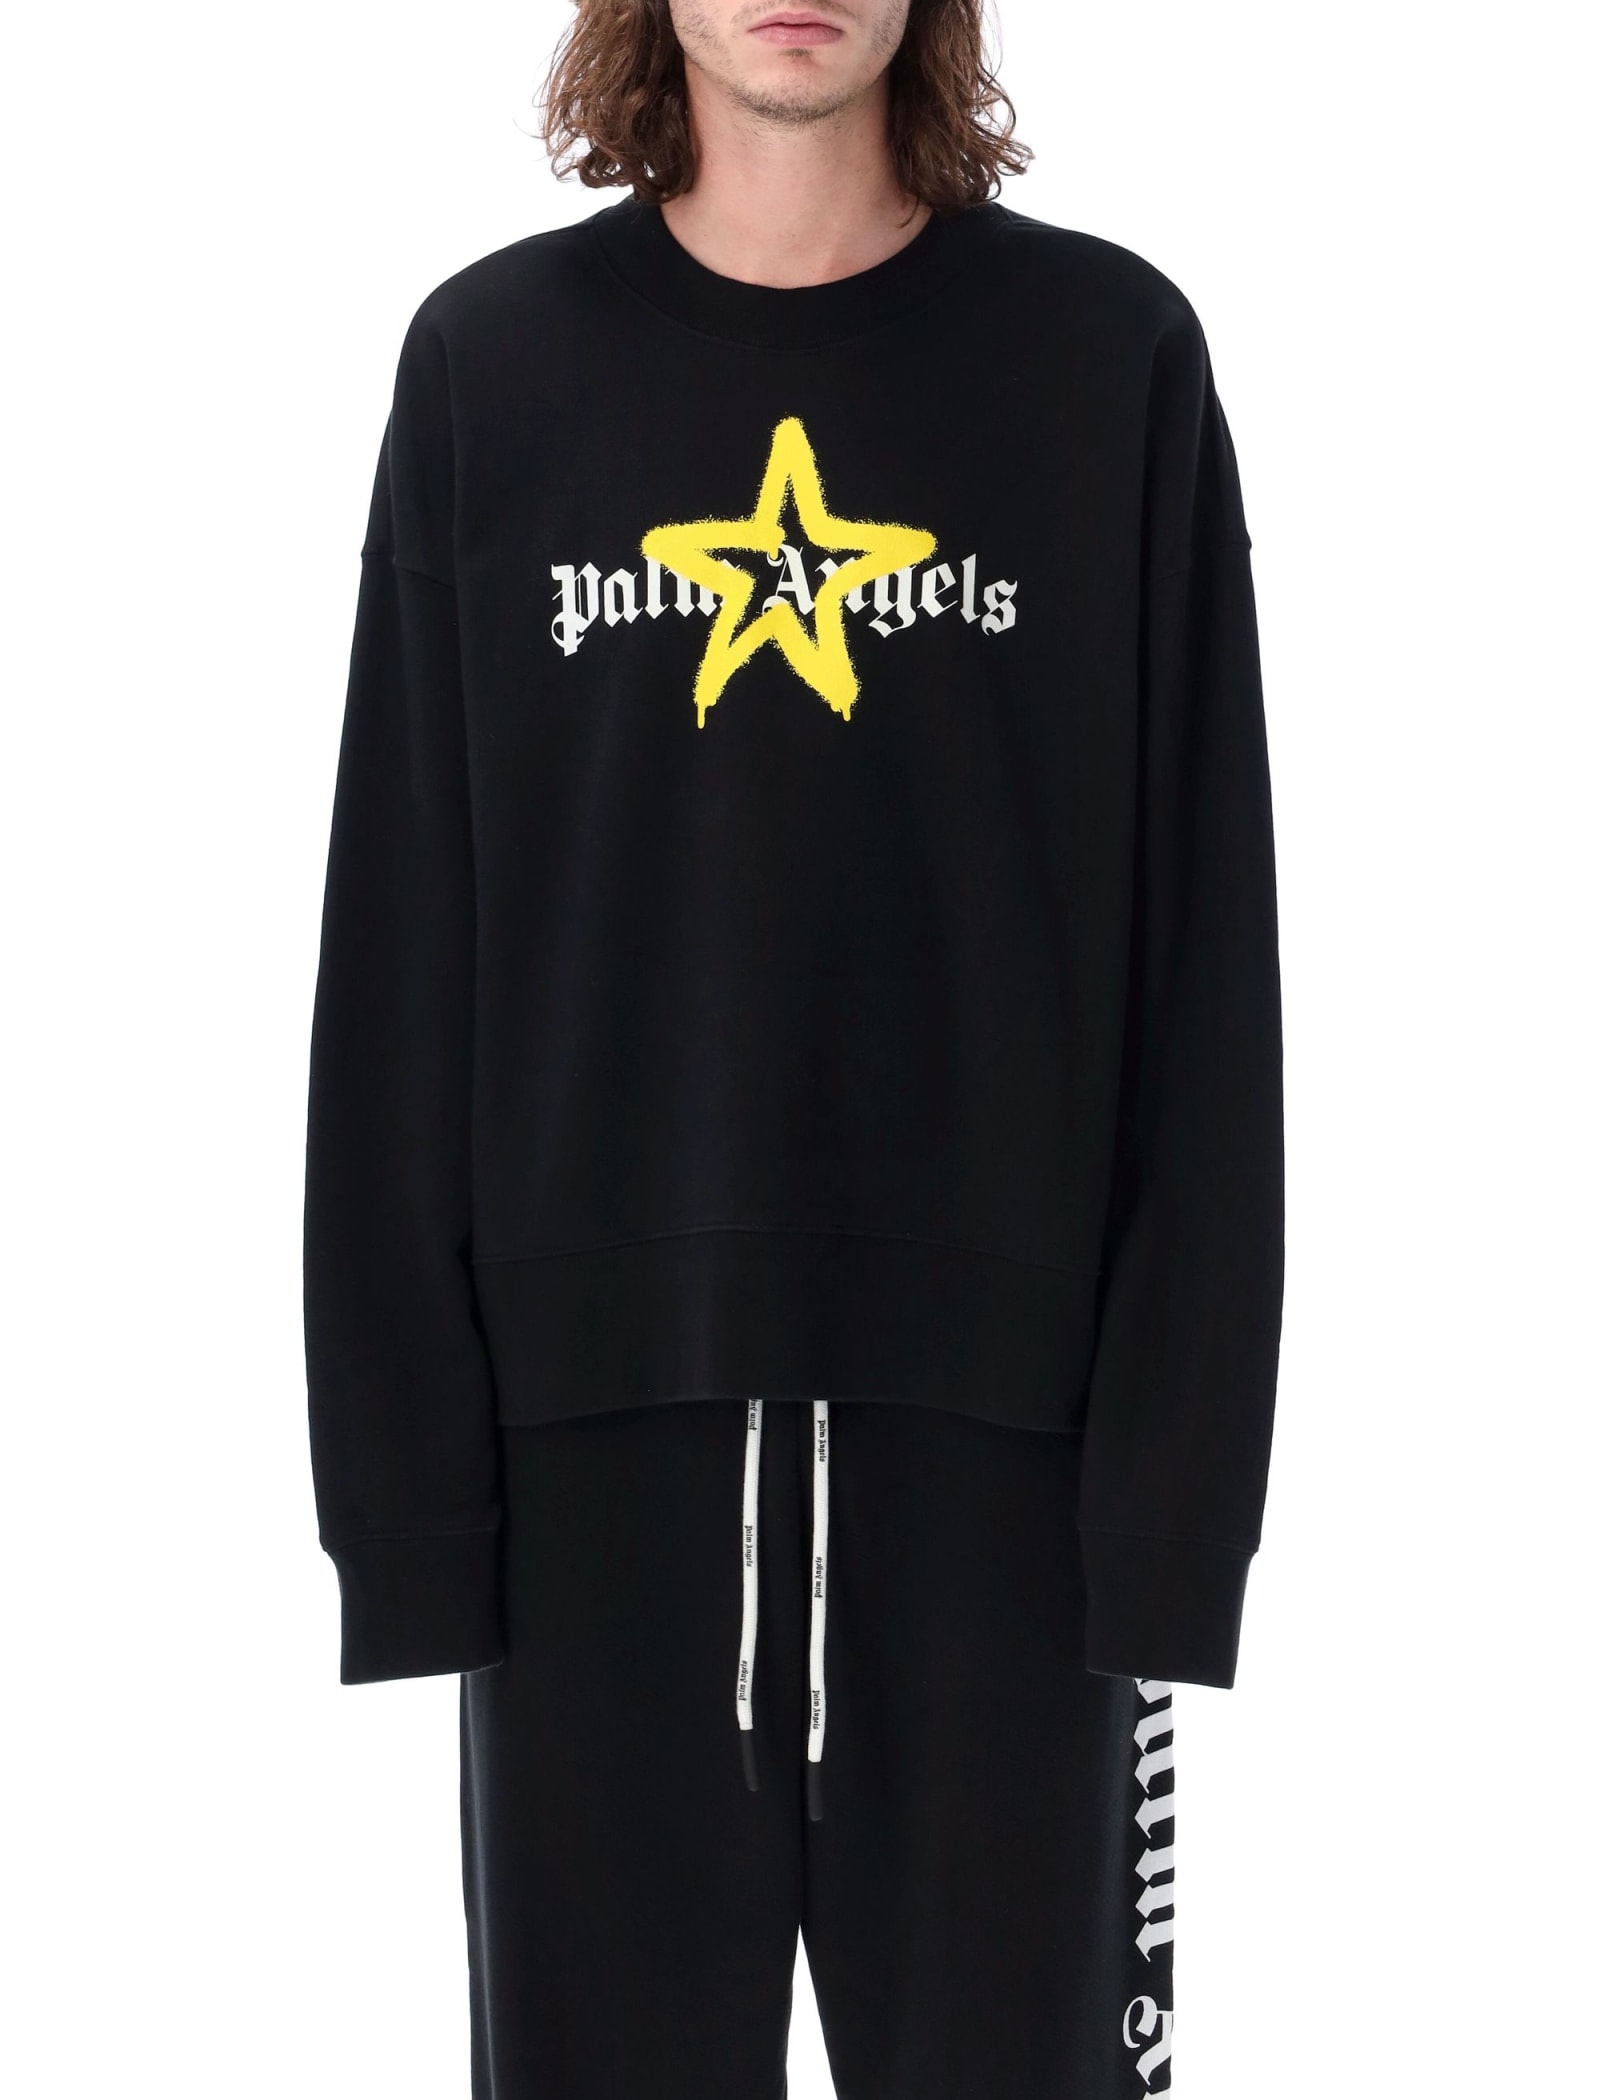 Palm Angels Black T-shirt With Yellow Star Size XL 